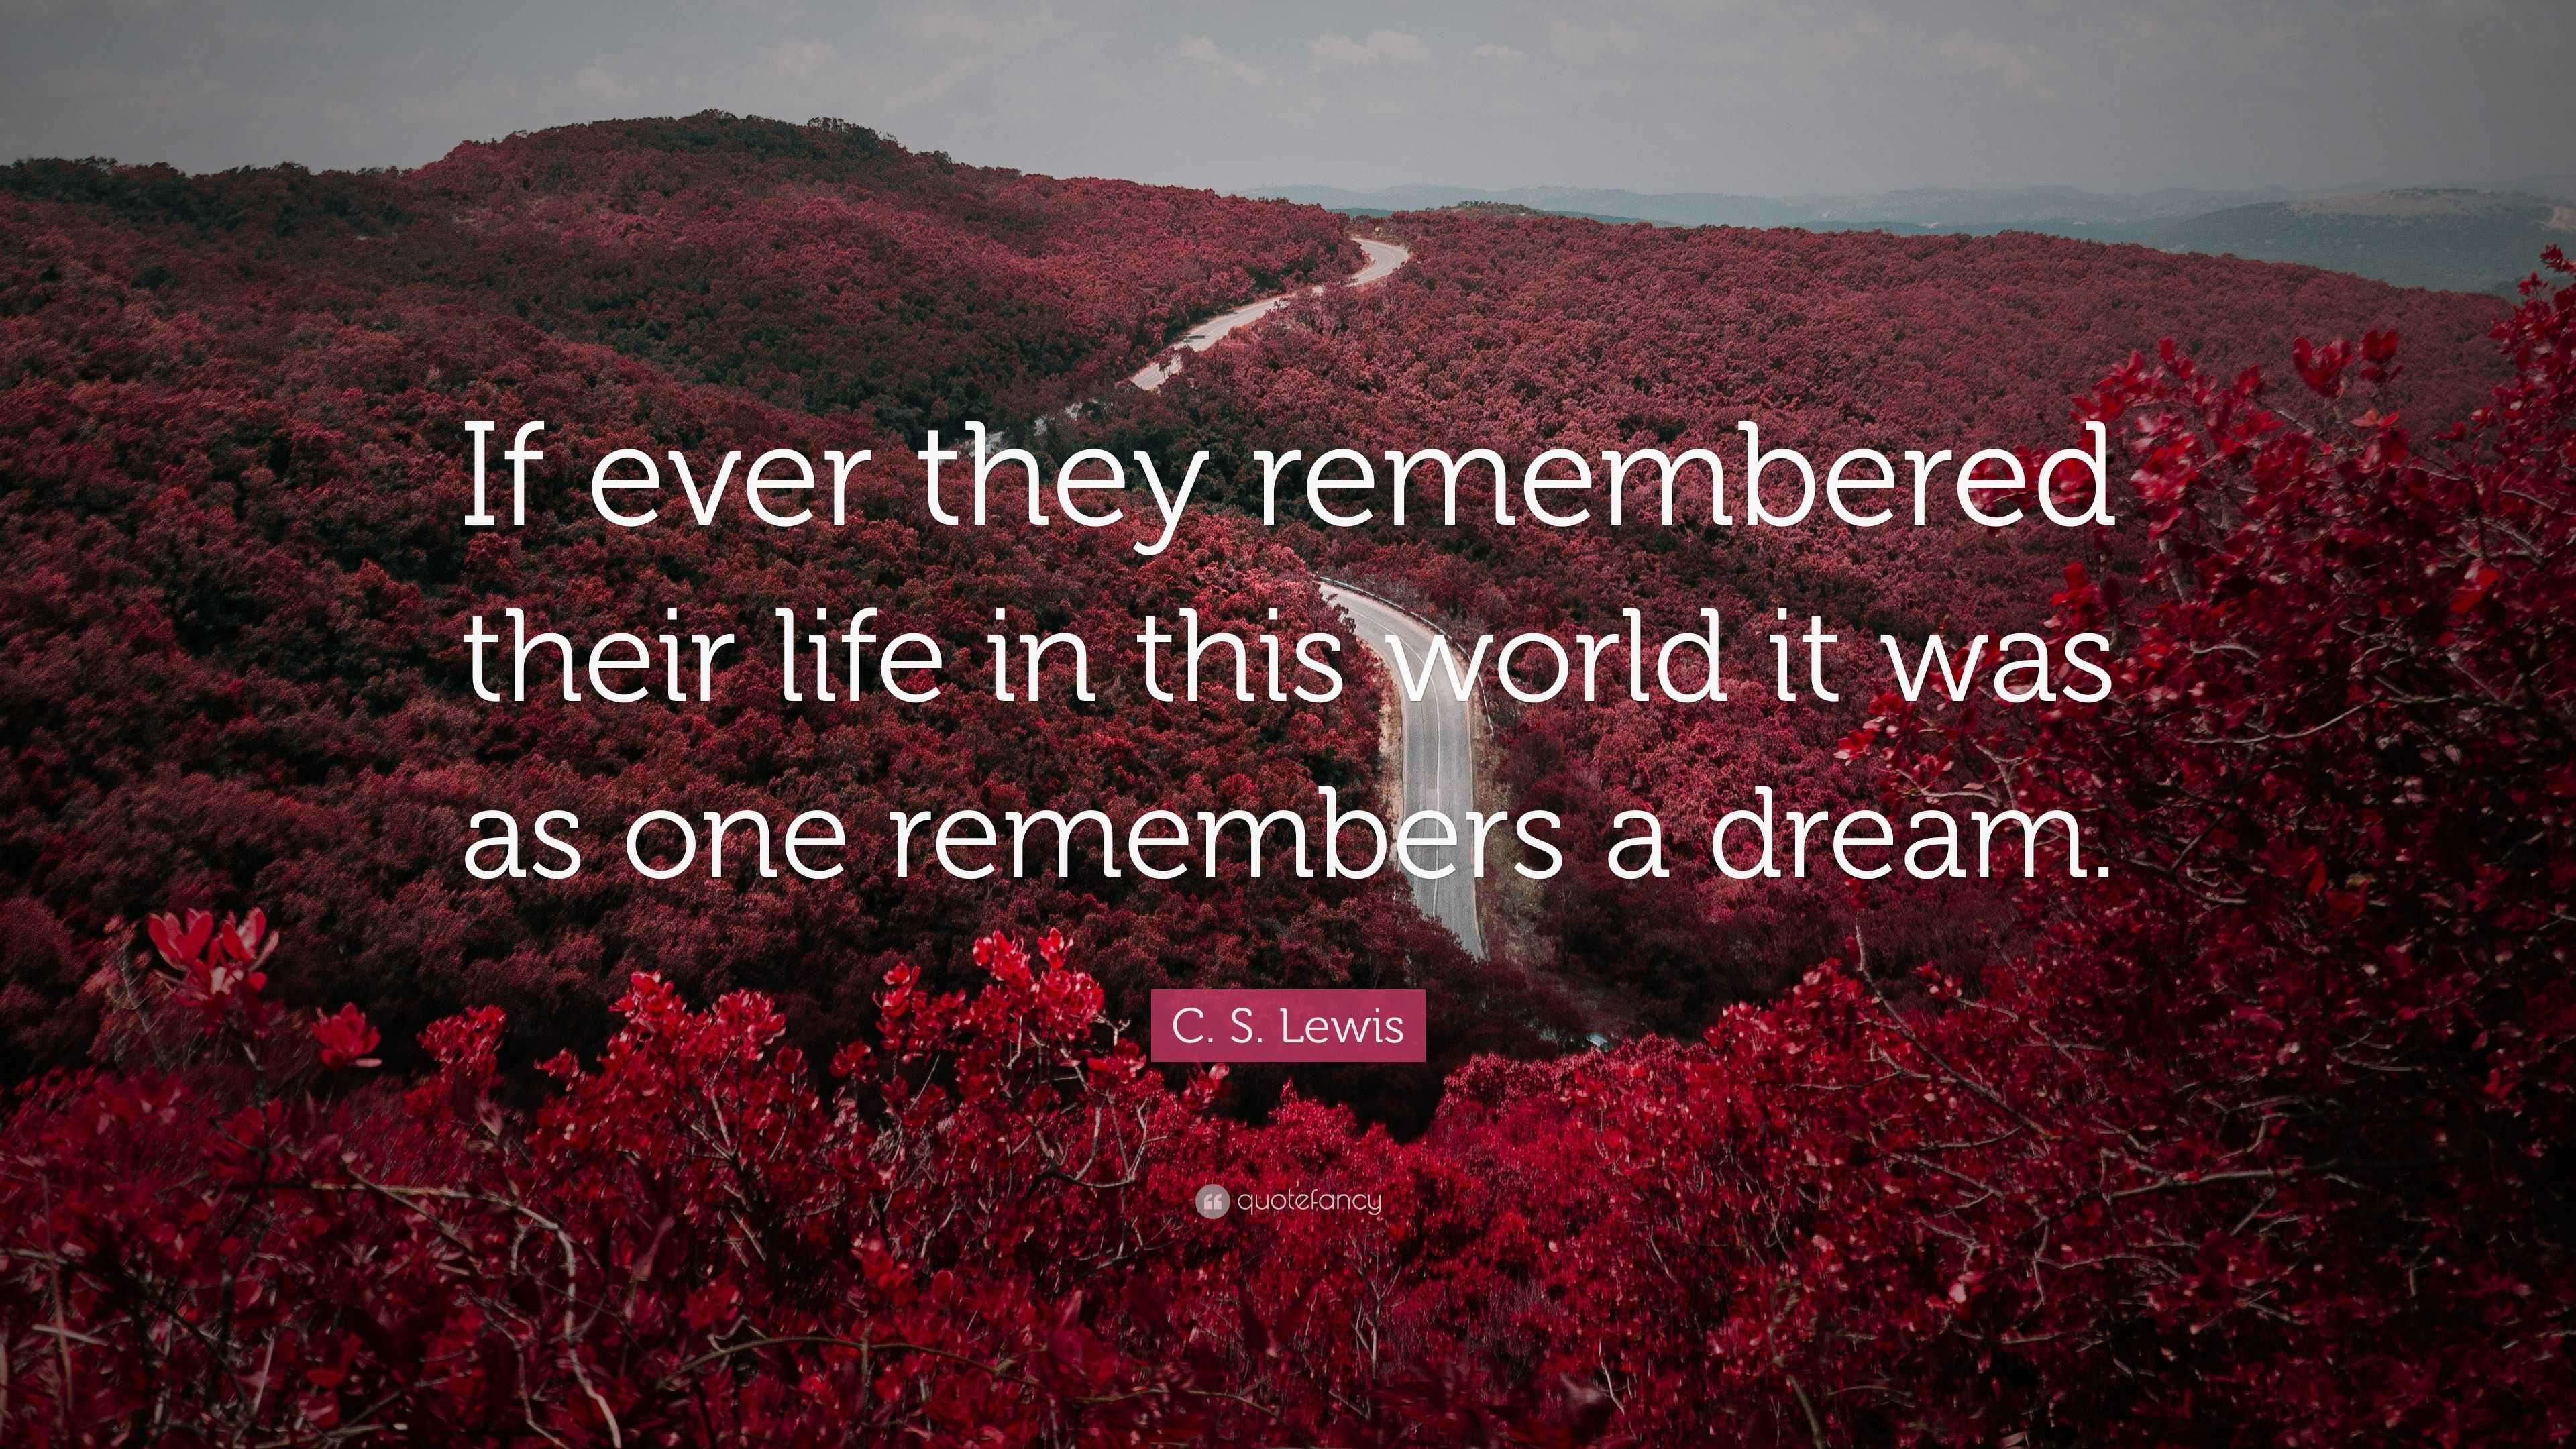 C. S. Lewis Quote: “If ever they remembered their life in this world it